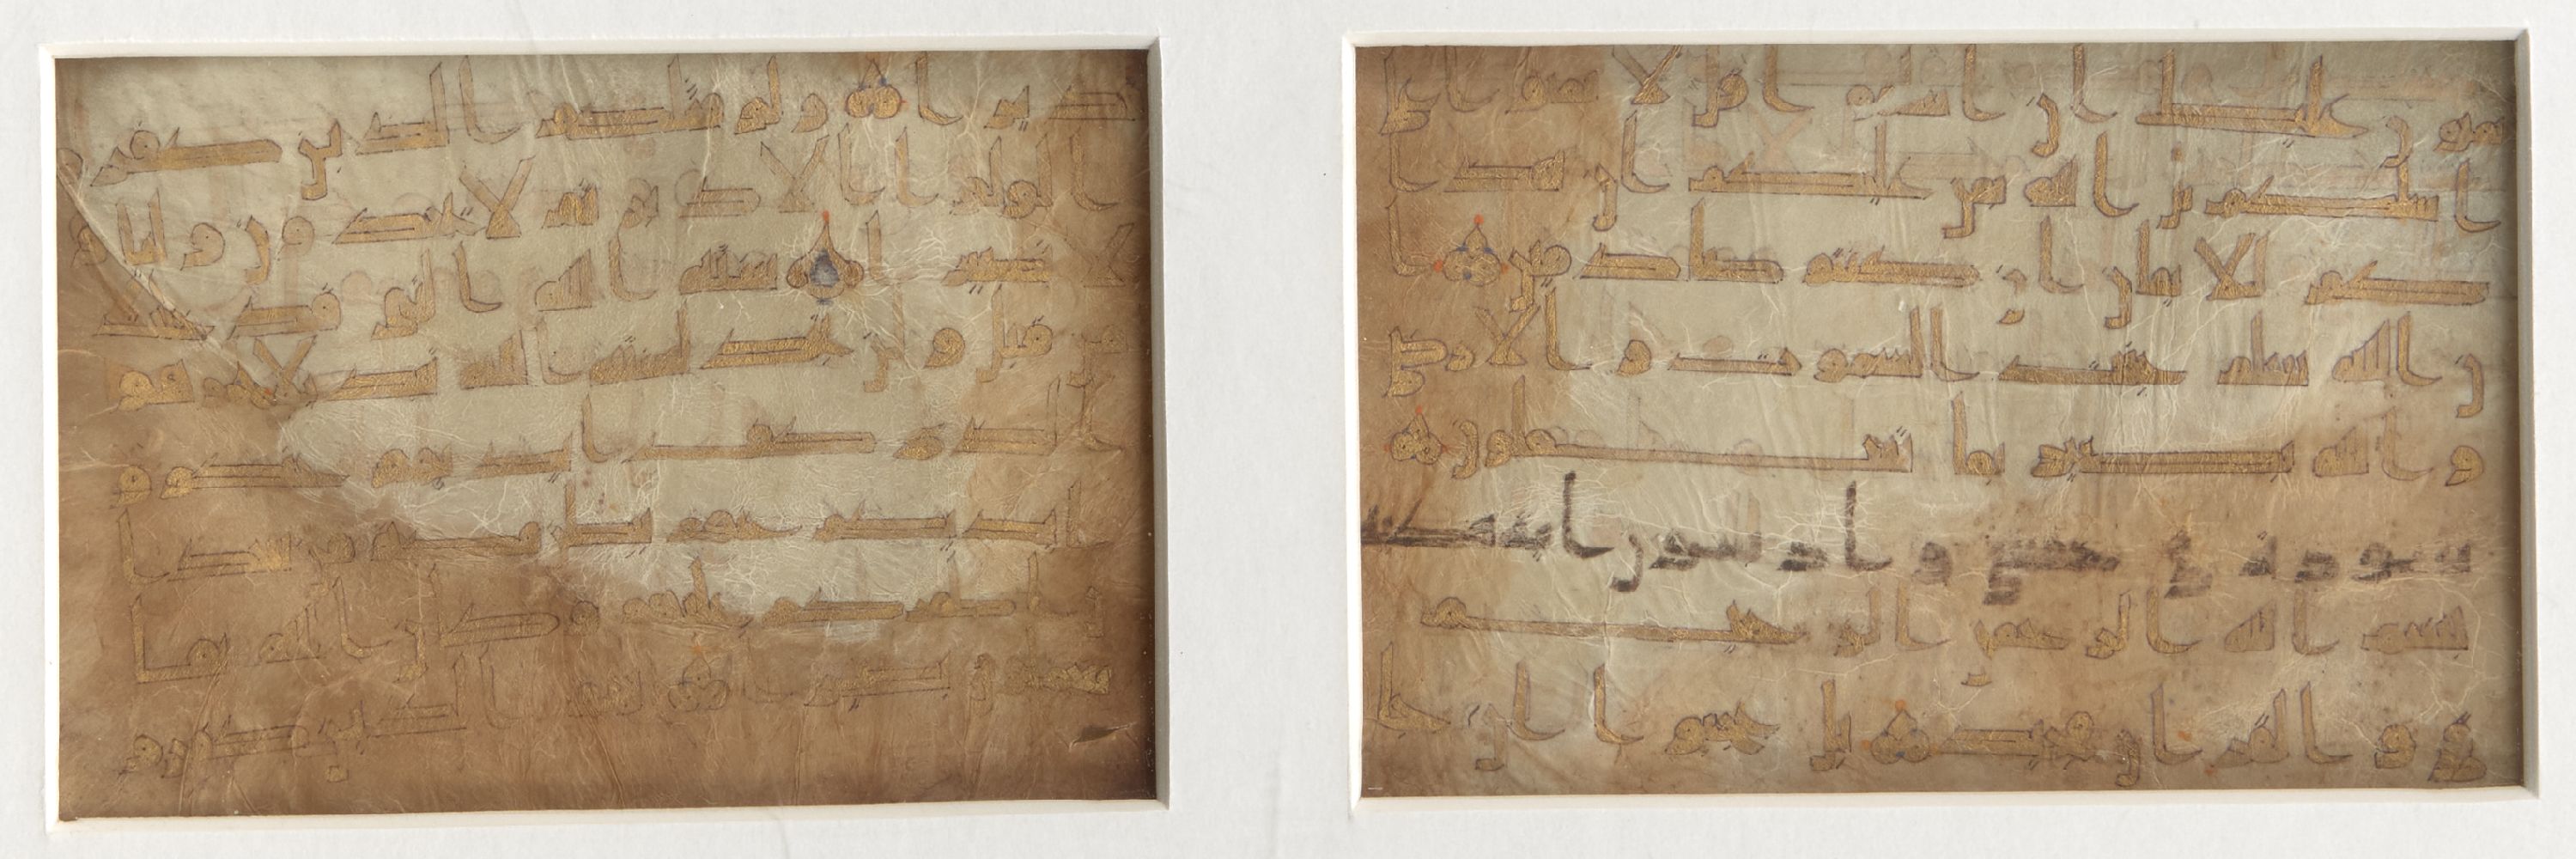 A gold Kufic Qur'an bifolio, North Africa or Near East, 9th/10th century, Qur'an XLVIII (sura al- - Image 2 of 2